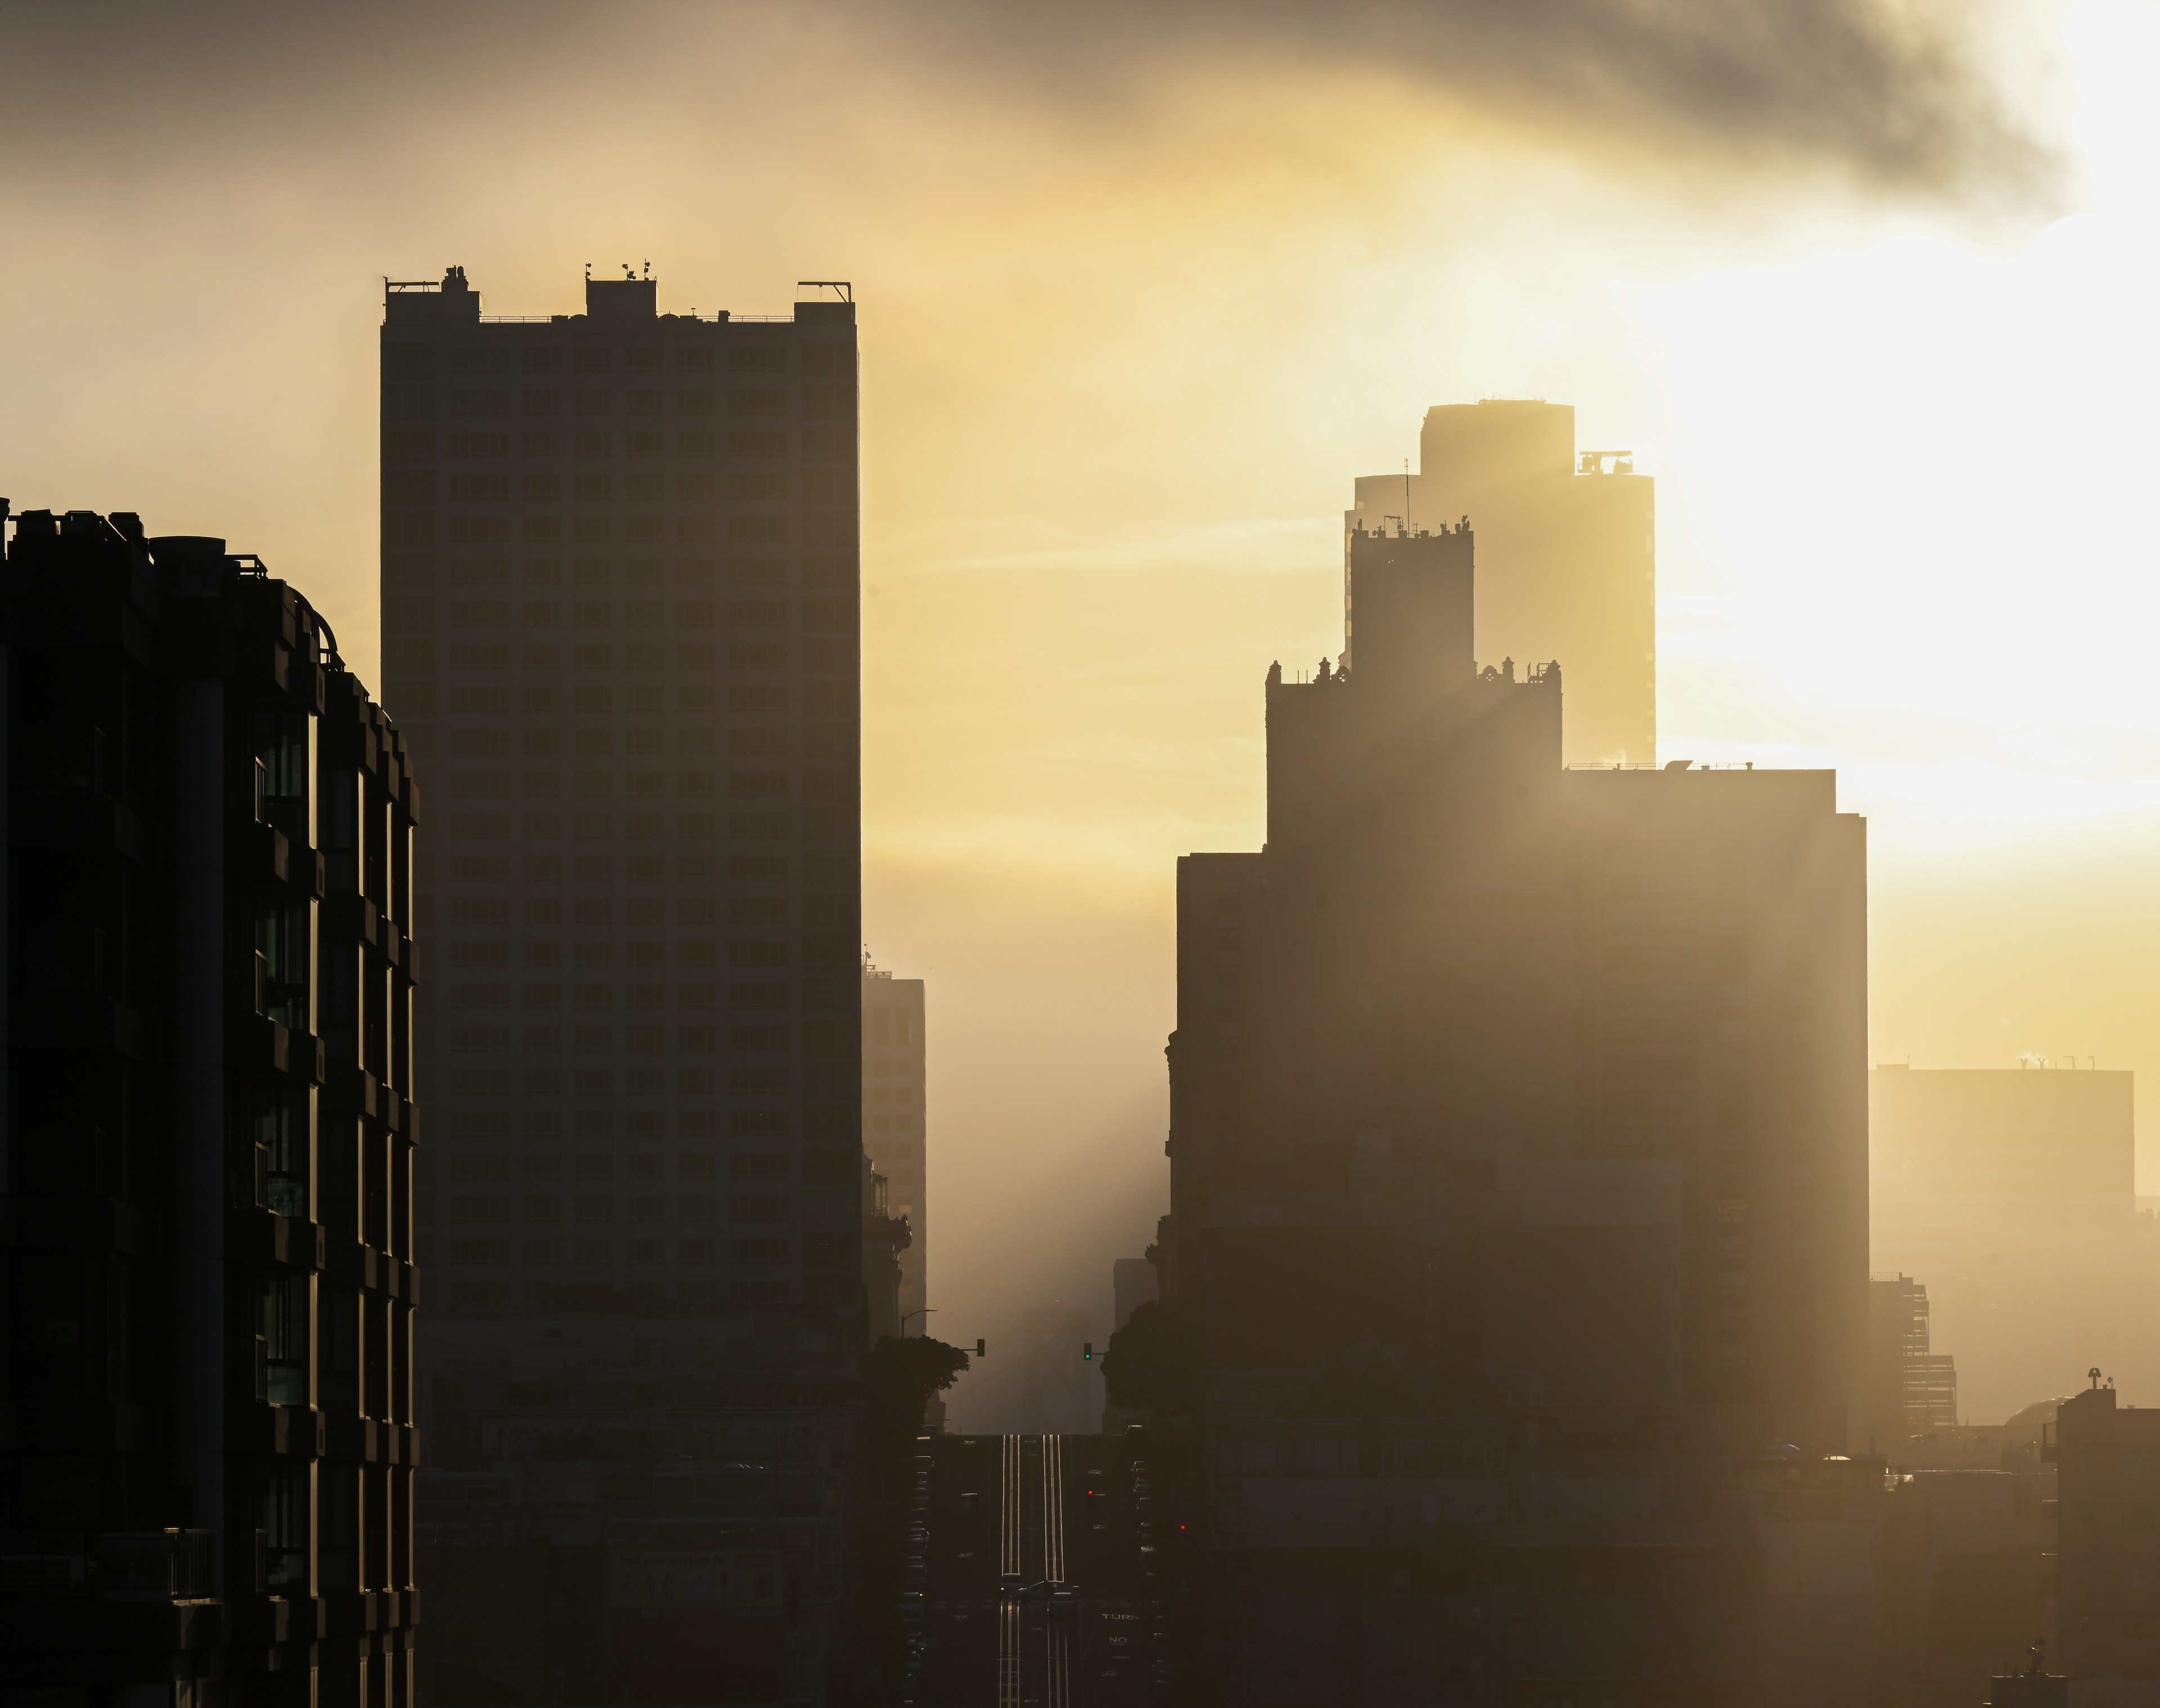 The image shows a cityscape at sunrise, with silhouette skyscrapers bathed in golden light and hazy clouds.